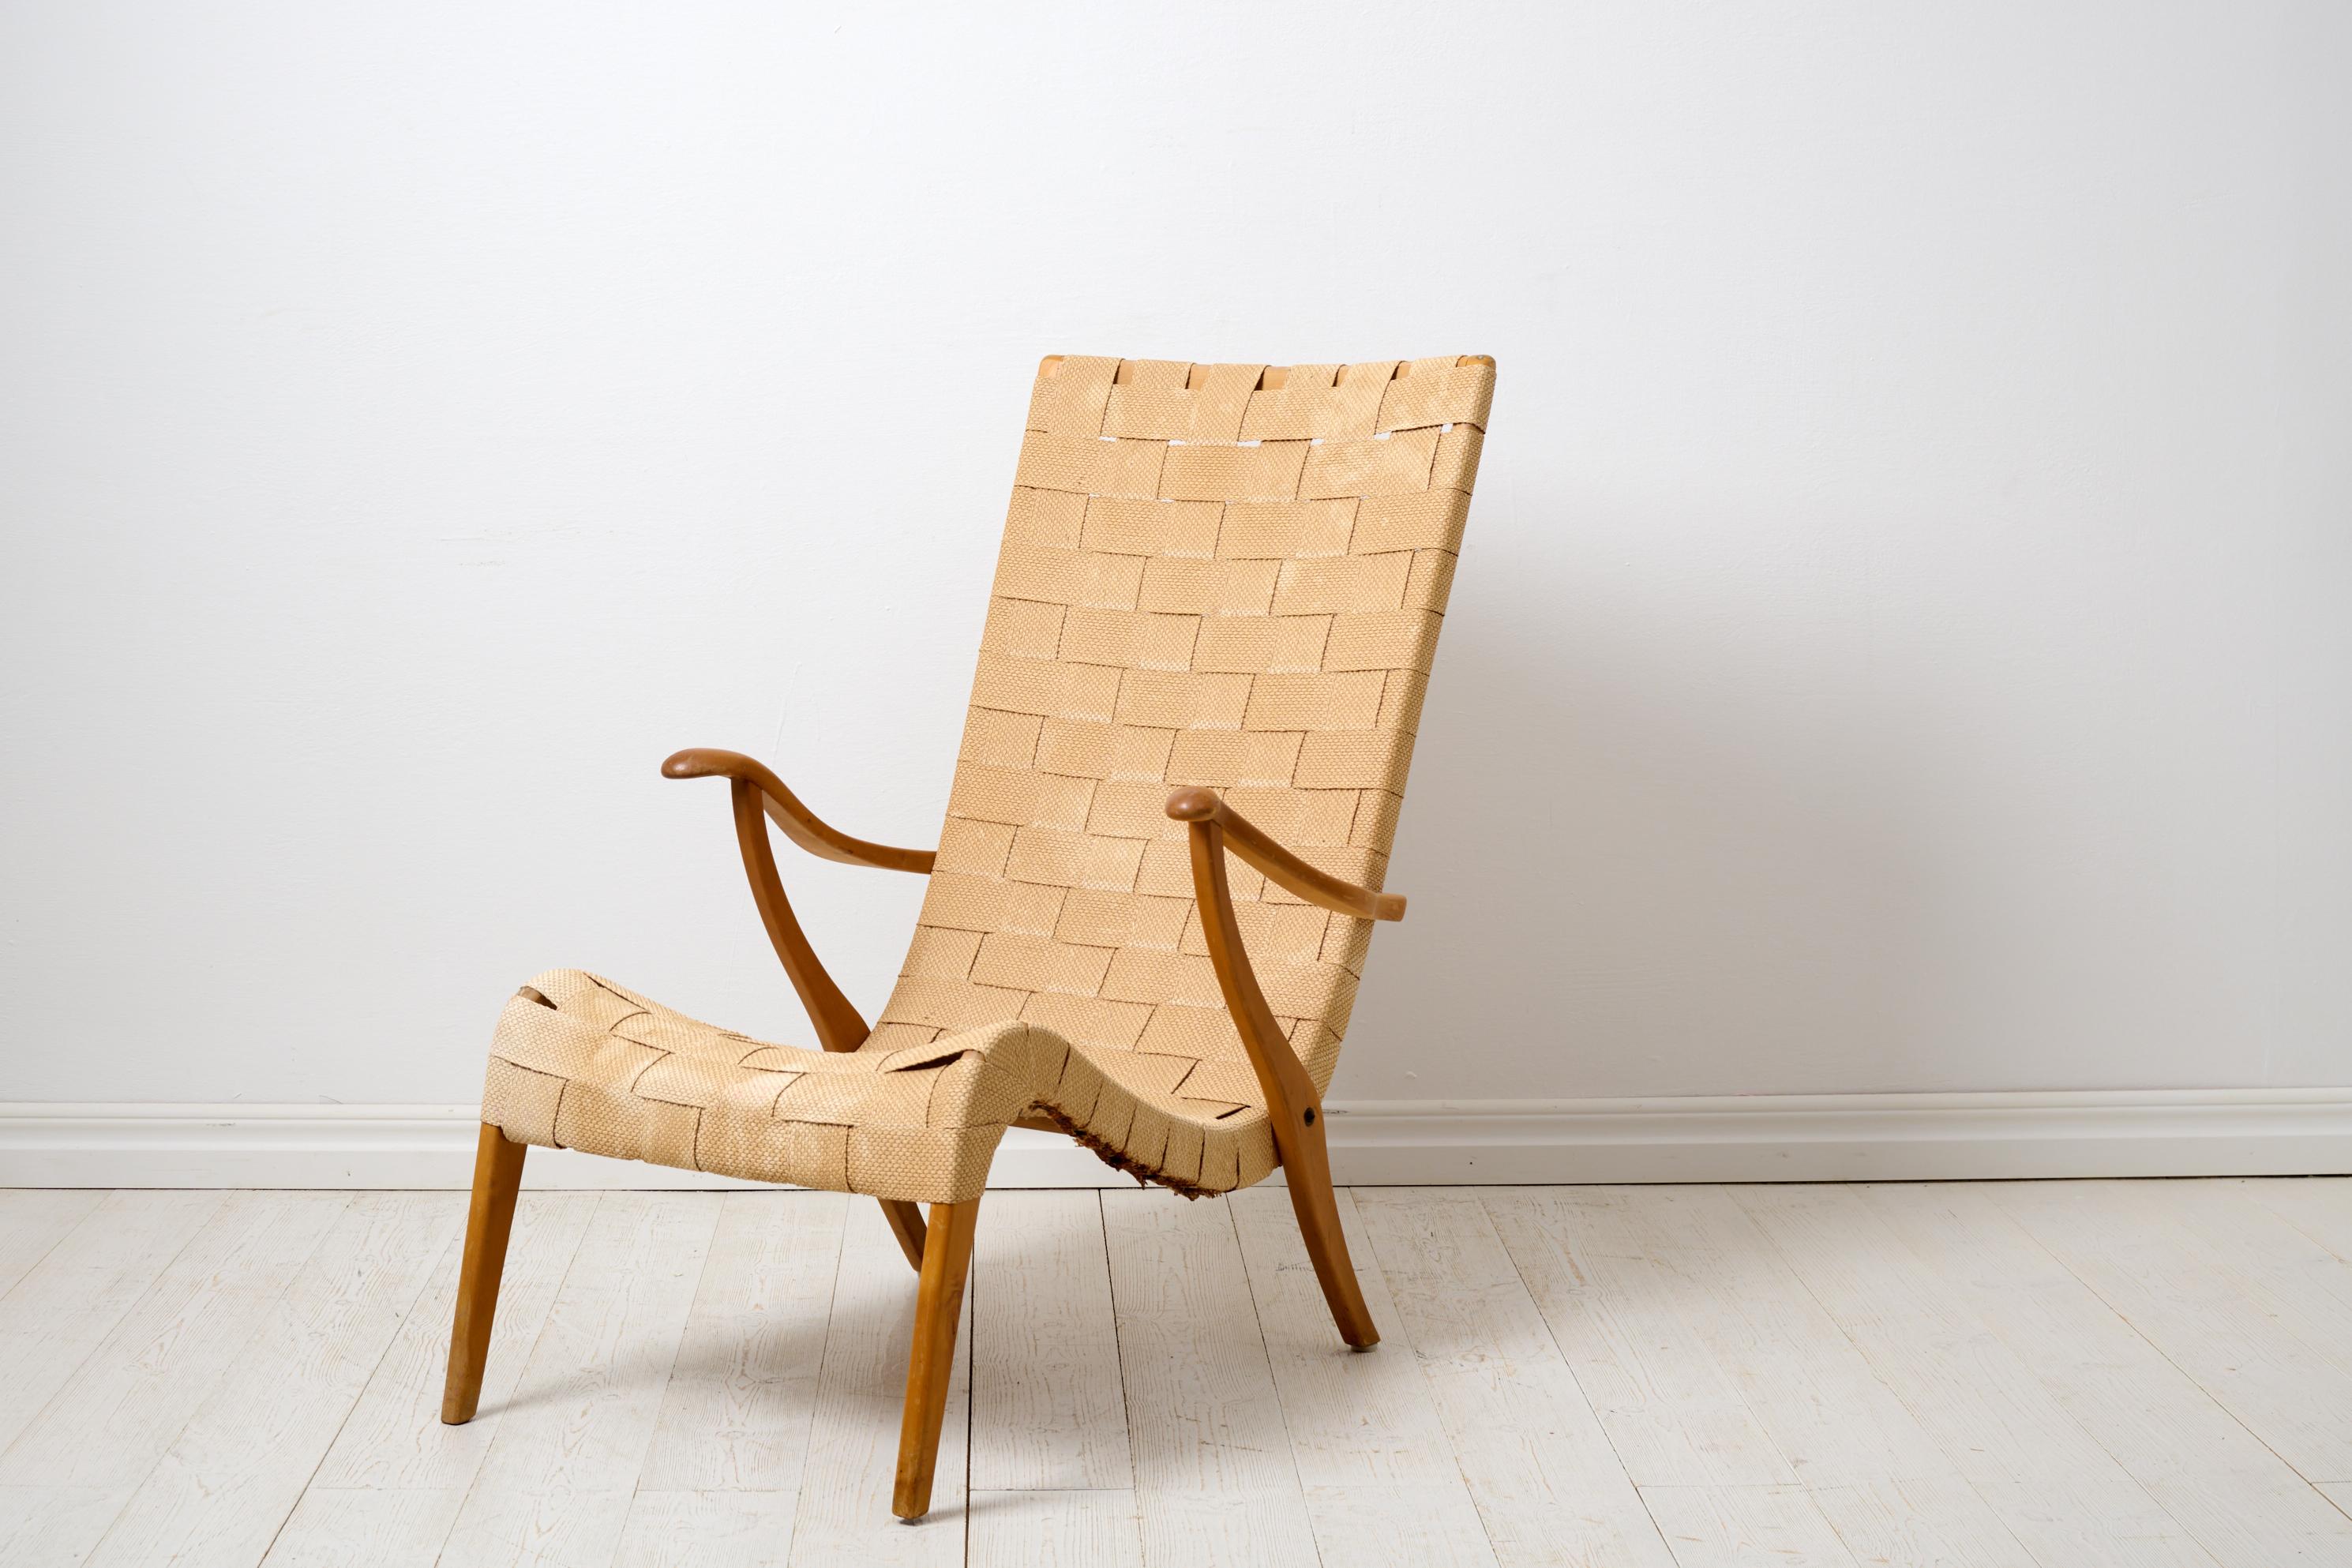 Vintage Axel Larsson armchair for Svenska Möbelfabrikerna Bodafors. The chair is a Scandinavian Swedish modern furniture, designed in 1937 and this one was made during the late 1930s or 1940s. Original straps and weaving, with some traces of use.